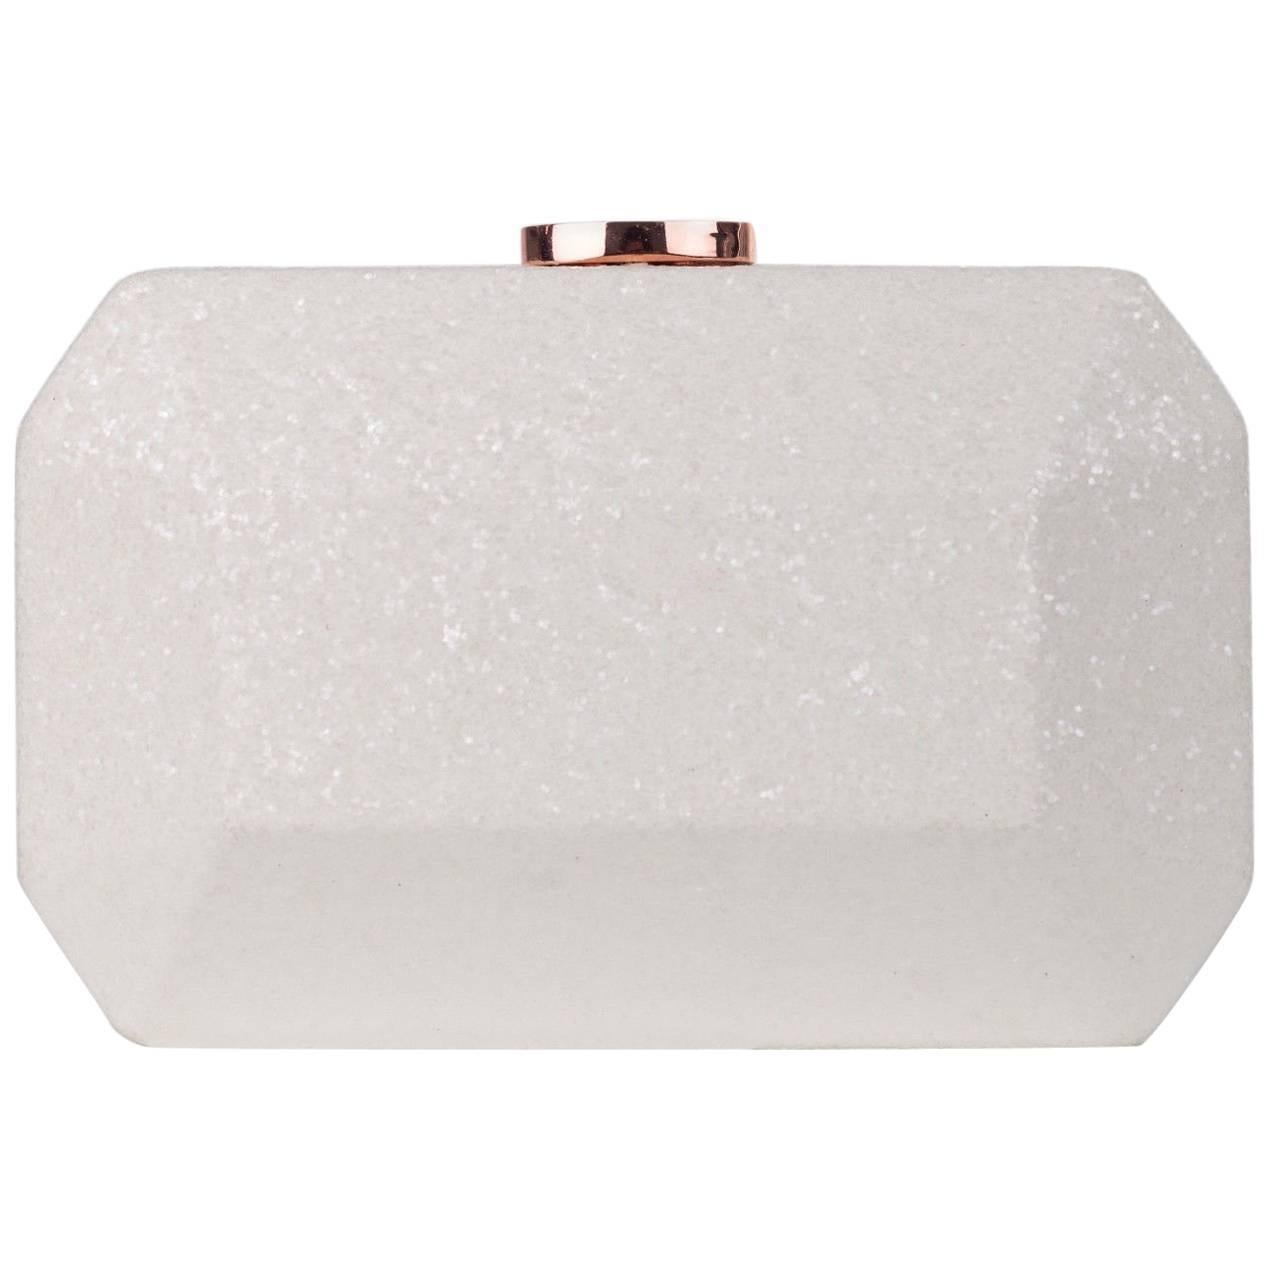 Just Cavalli Solid White Ivory Glitter Diamond Clutch Bag For Sale